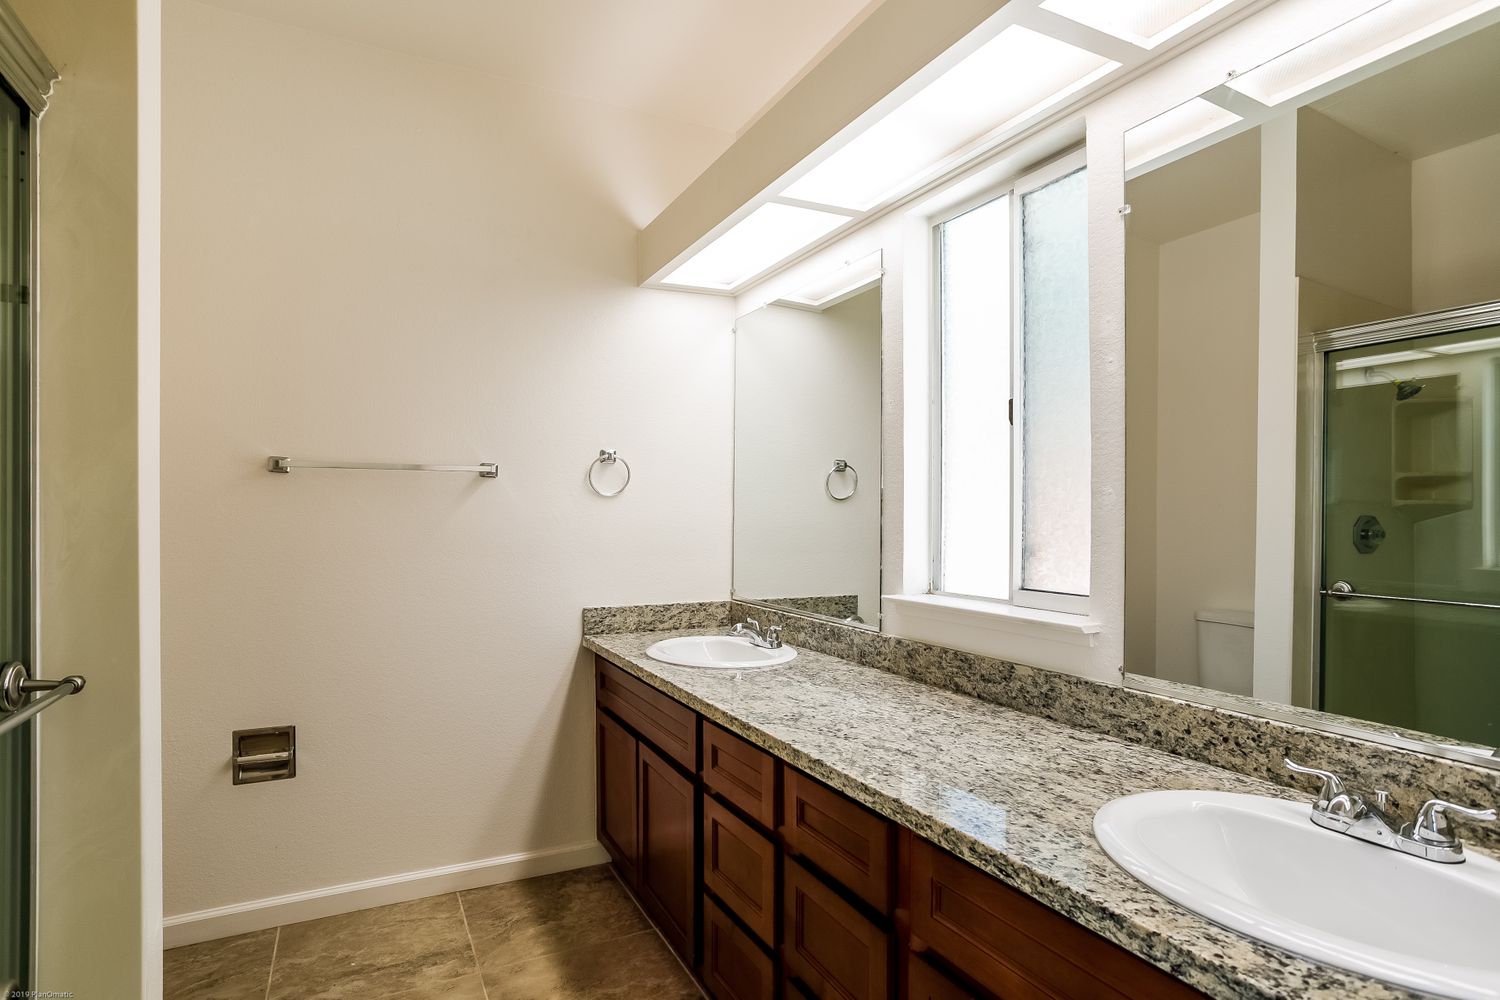 Bathroom with dual vanity sinks, granite countertop and bright lighting at Invitation Homes Northern CA.